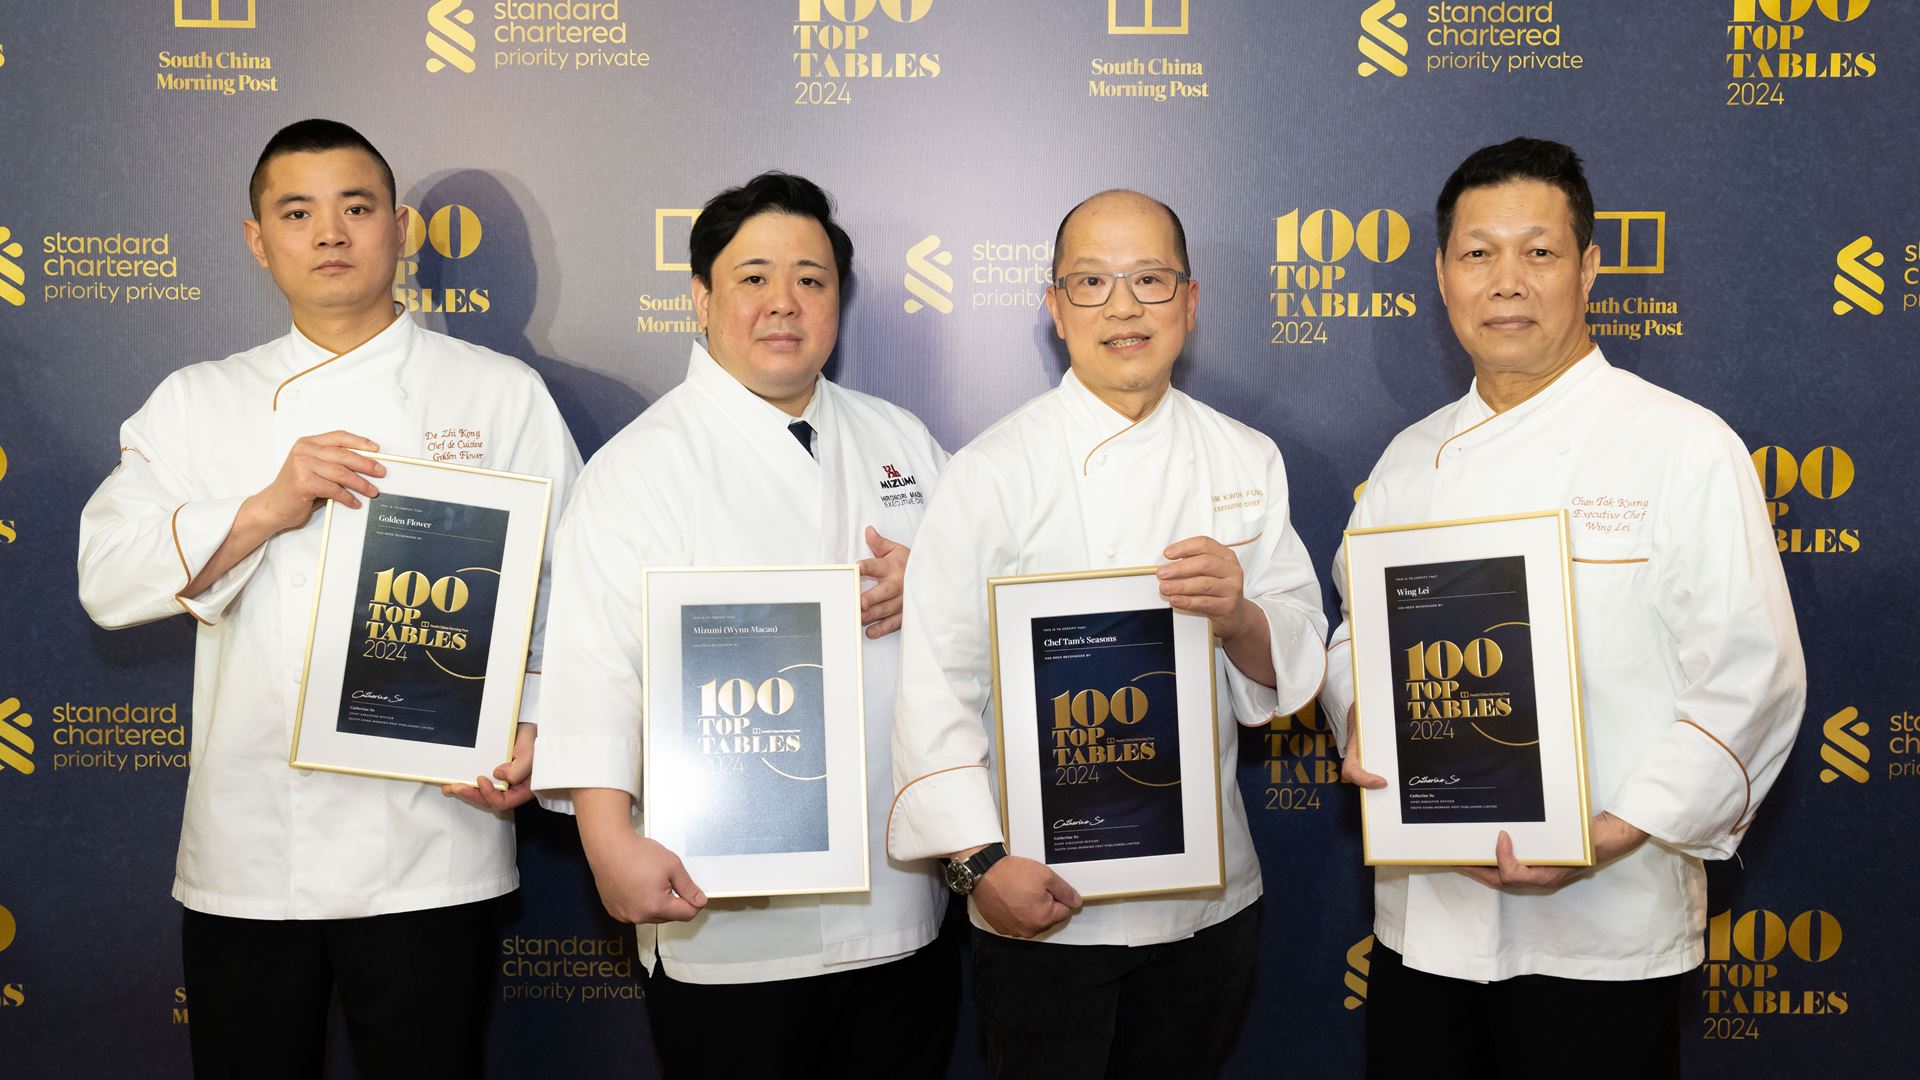 The Head Chefs from four Wynn signature restaurants attend the SCMP 100 Top Tables 2024 Award Ceremony